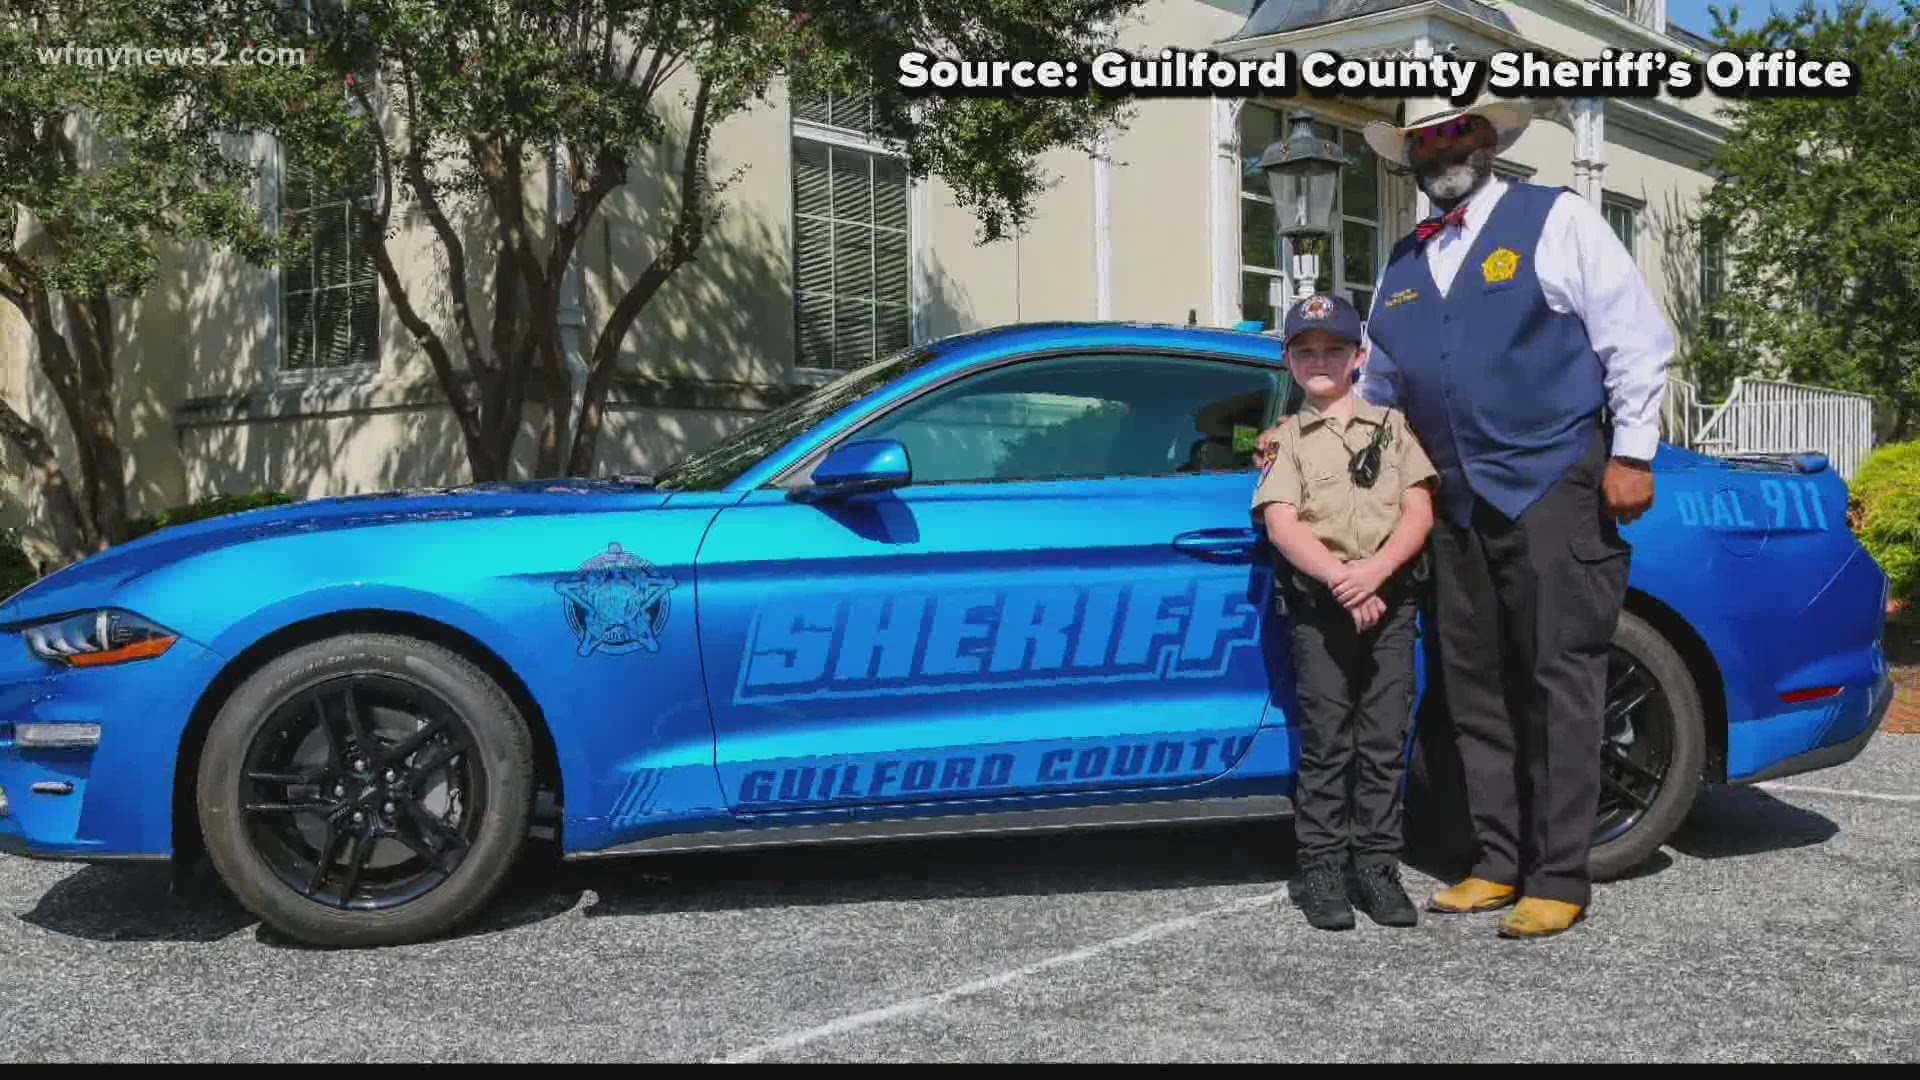 The sheriff's office is looking for new members for their junior deputy program